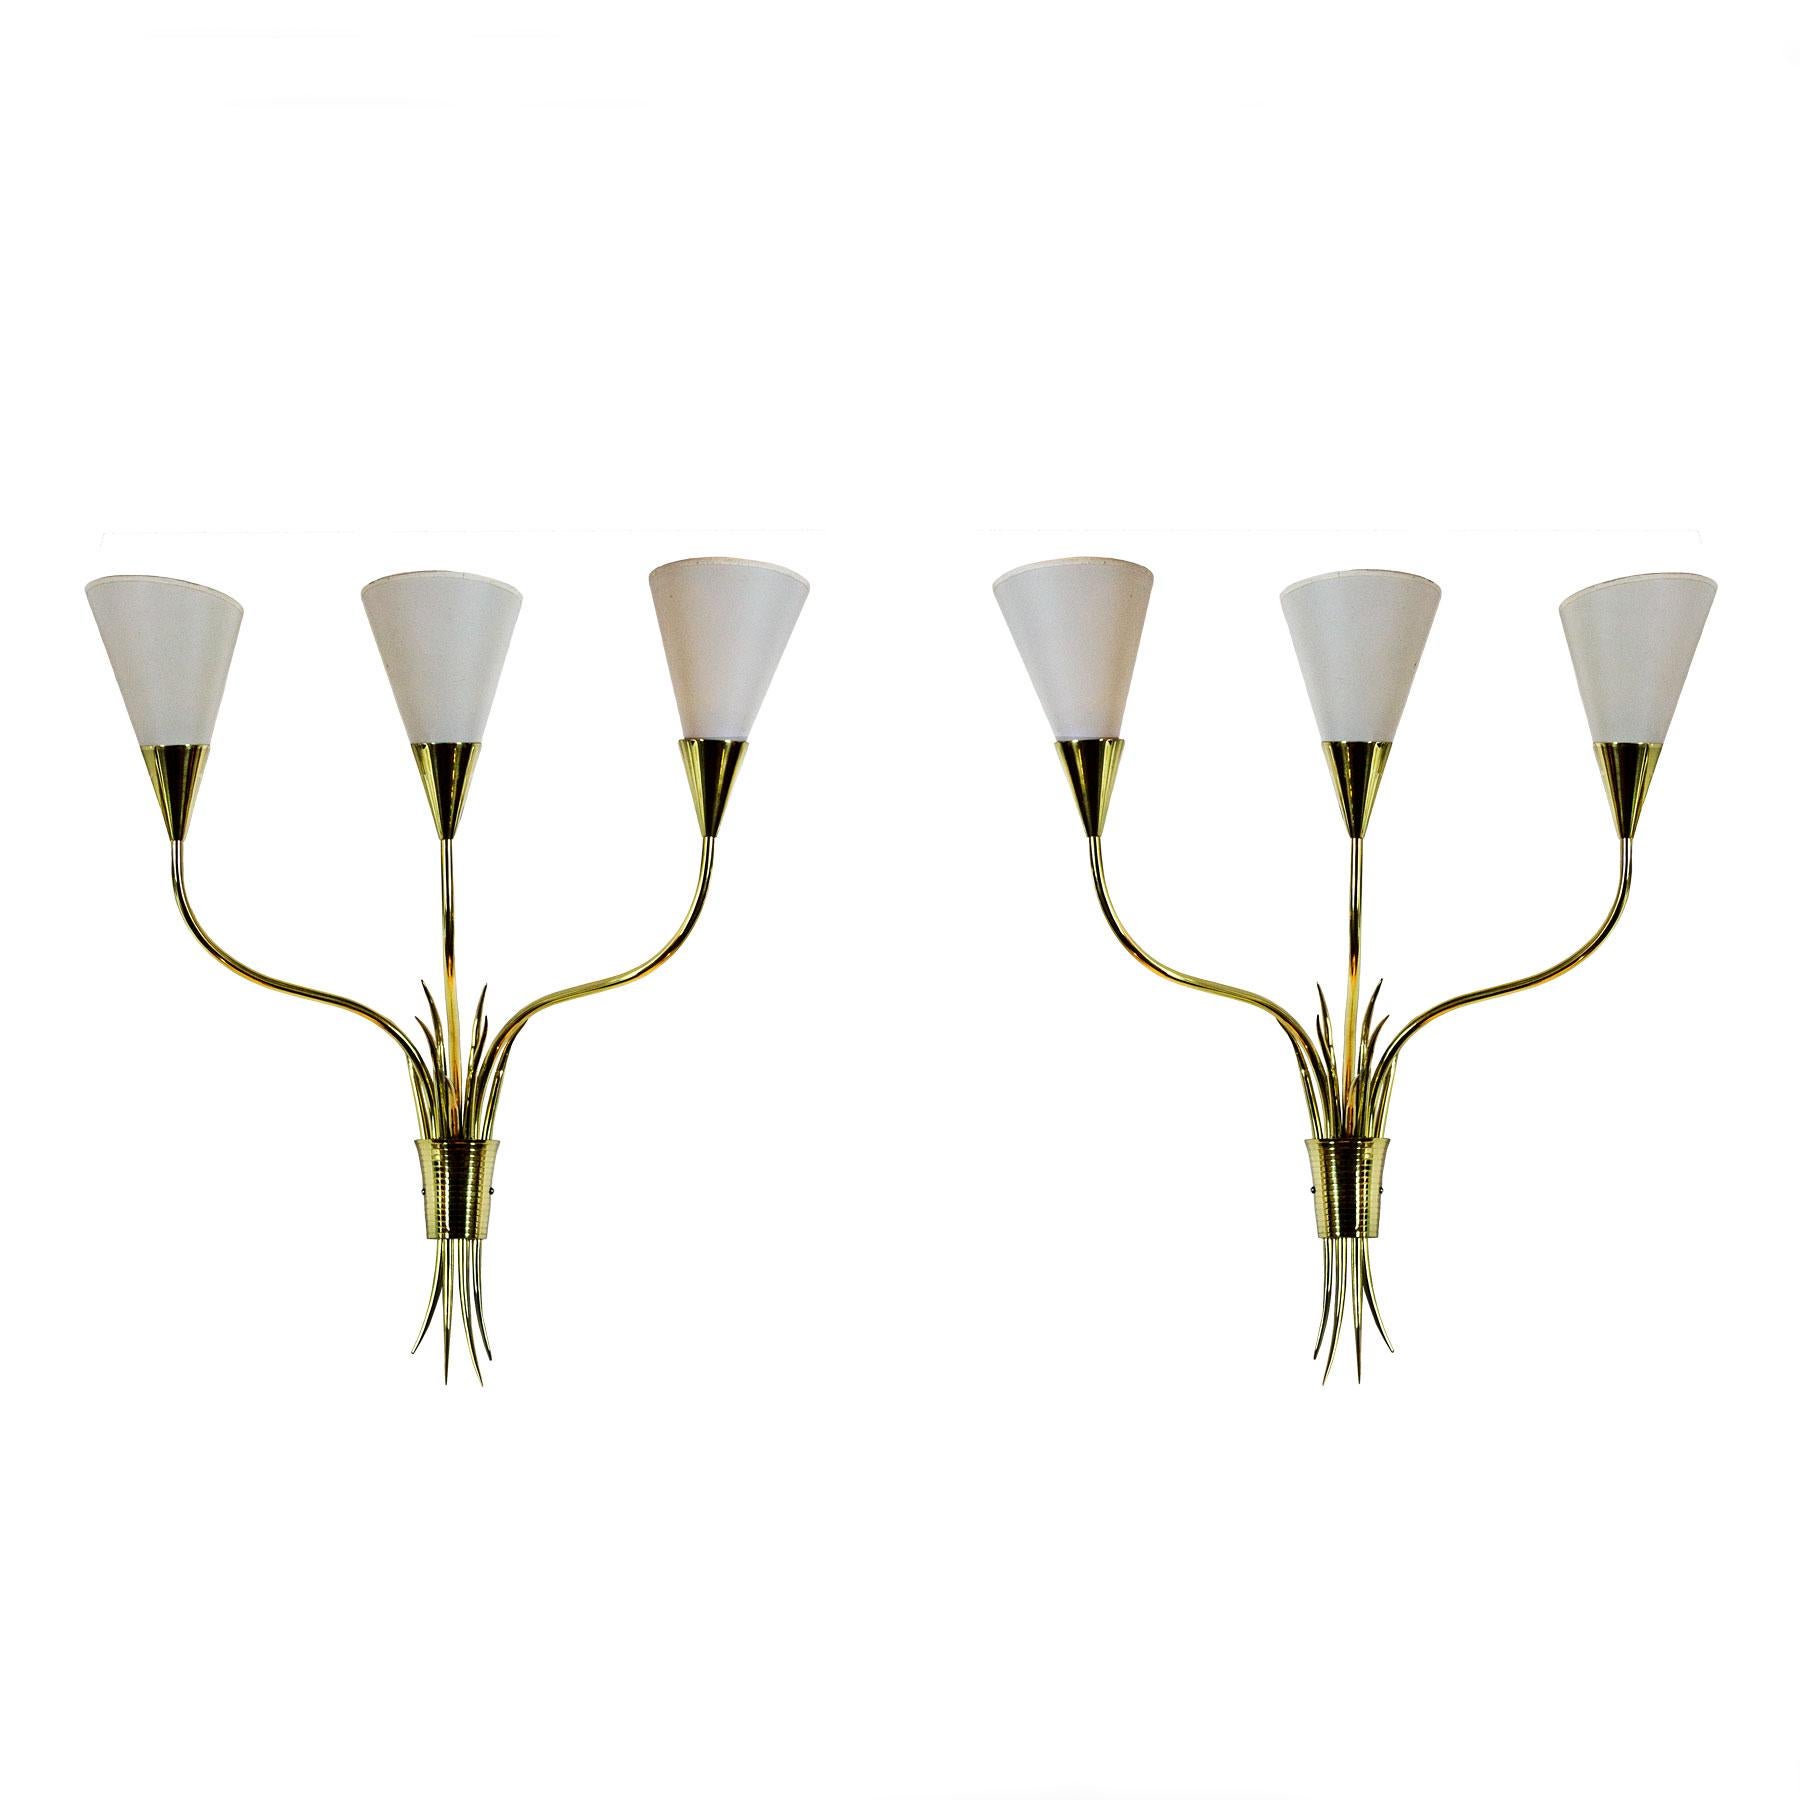 Pair of Wall Lights, Polished Brass, Celluloid Lampshades, France, 1955-1960